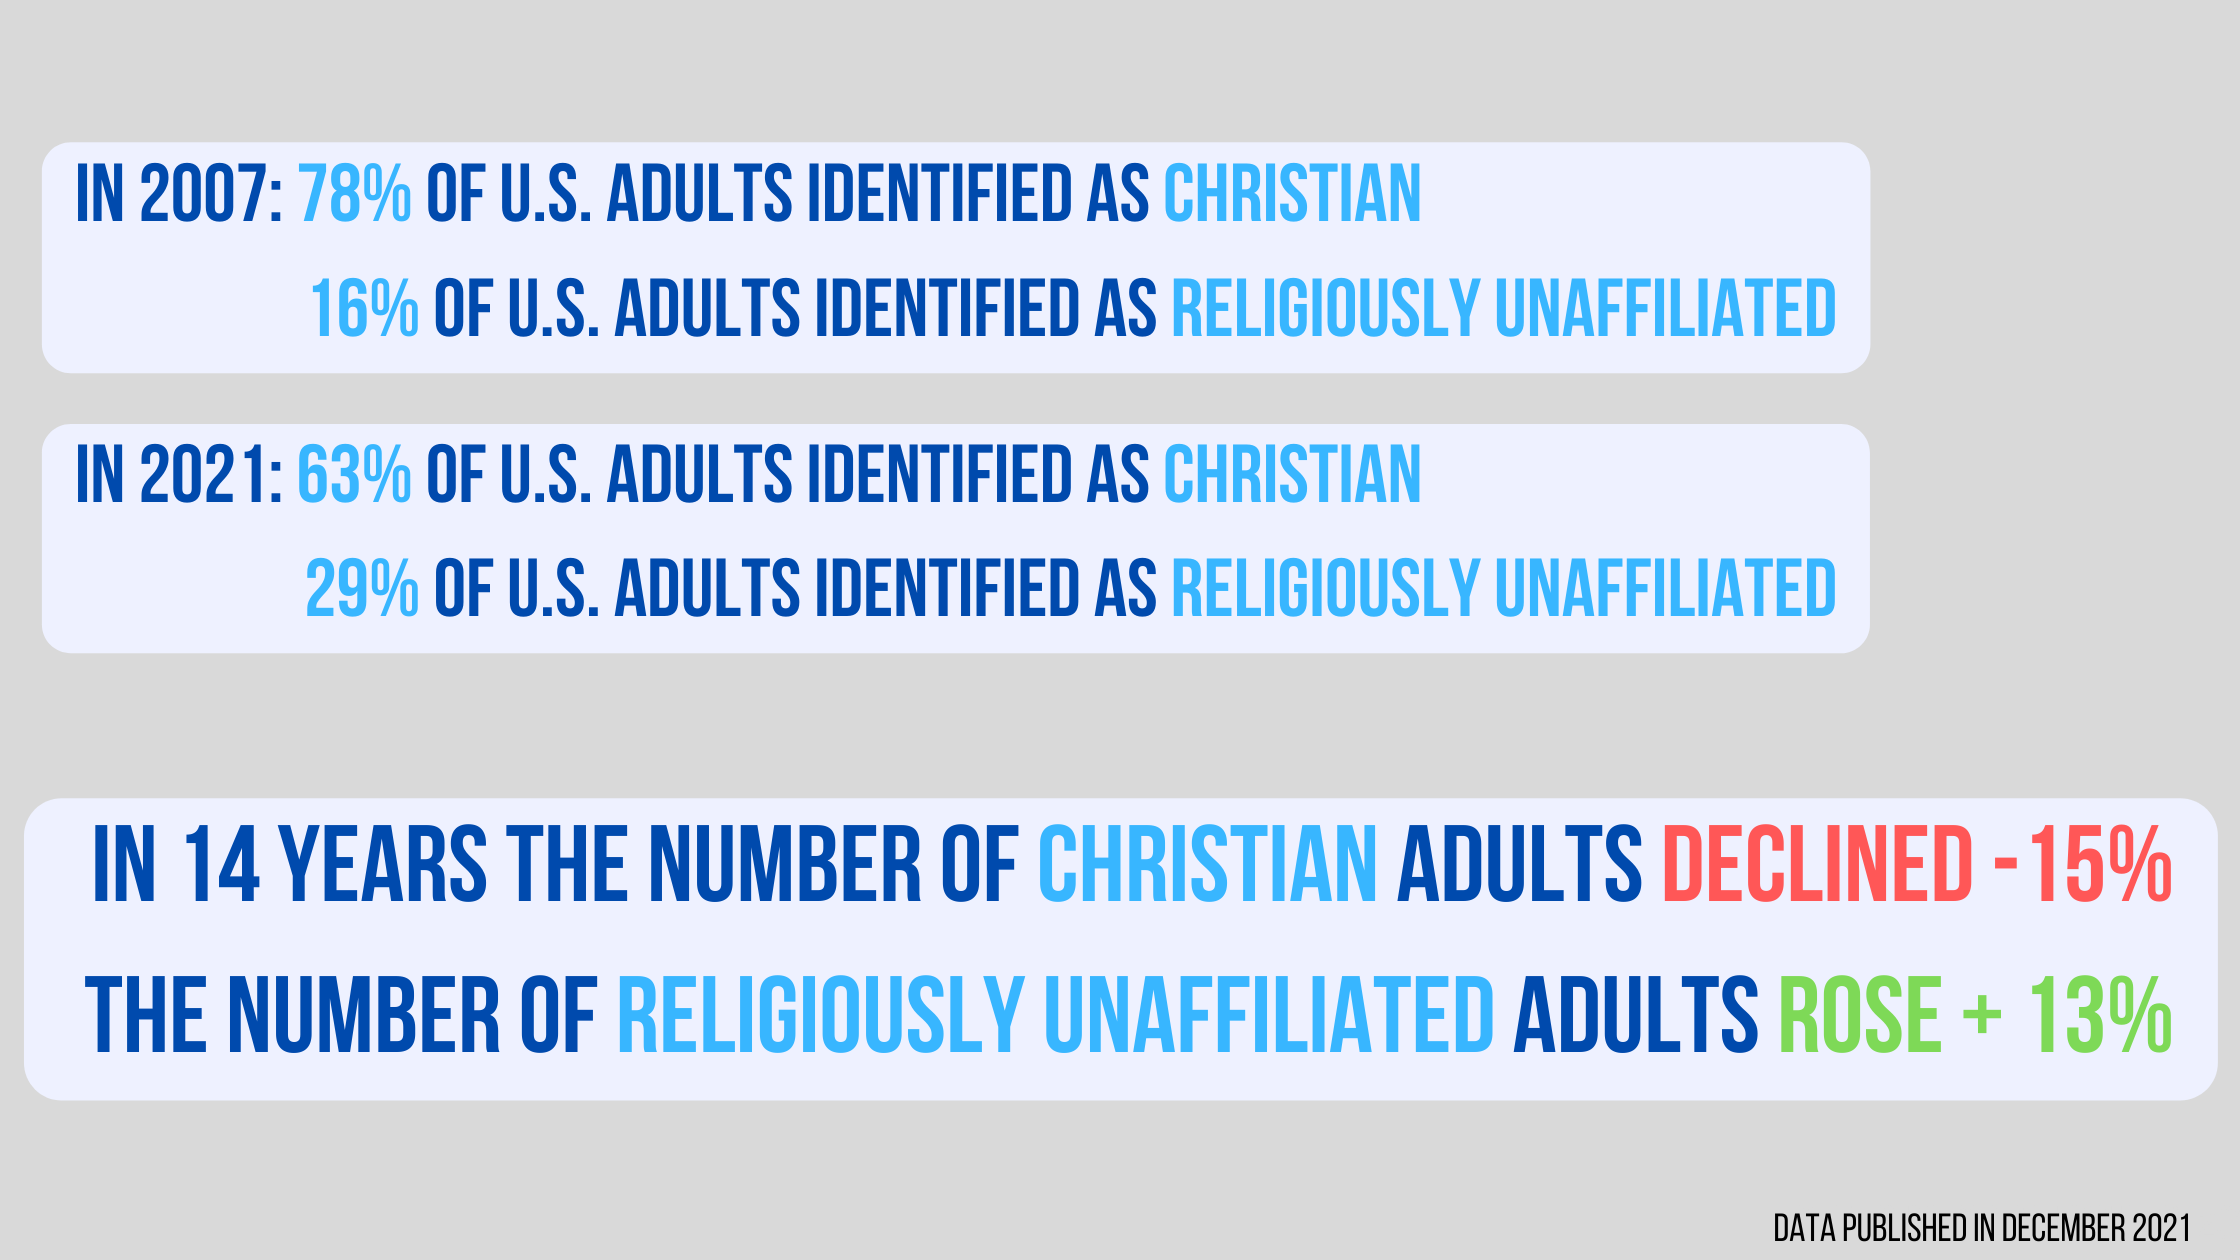 Graphic demonstrating that in the last 14 years the number of Christian adults declined 15% and the number of religiously unaffilated adults rose %13. 